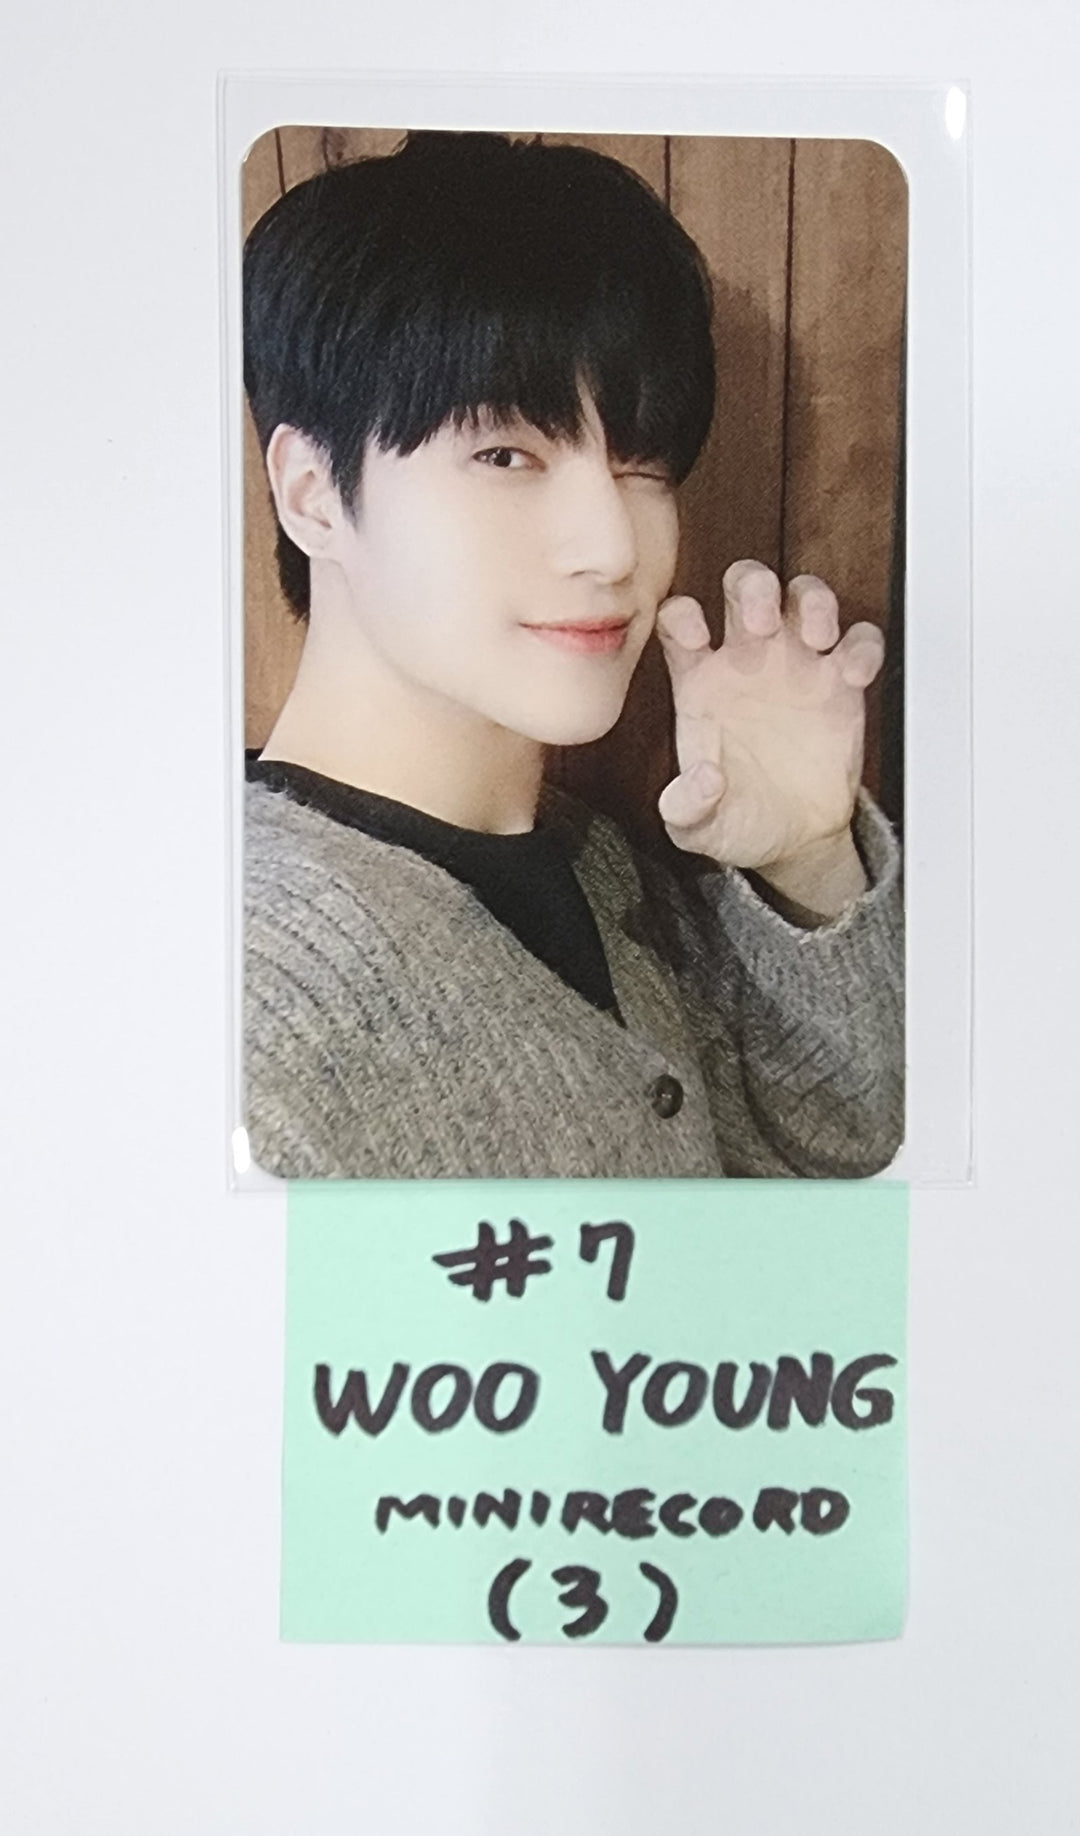 Ateez "The World Ep.Fin : Will" - Minirecord Fansign Event Photocards Round 4 [Platform Ver.] [24.3.5]